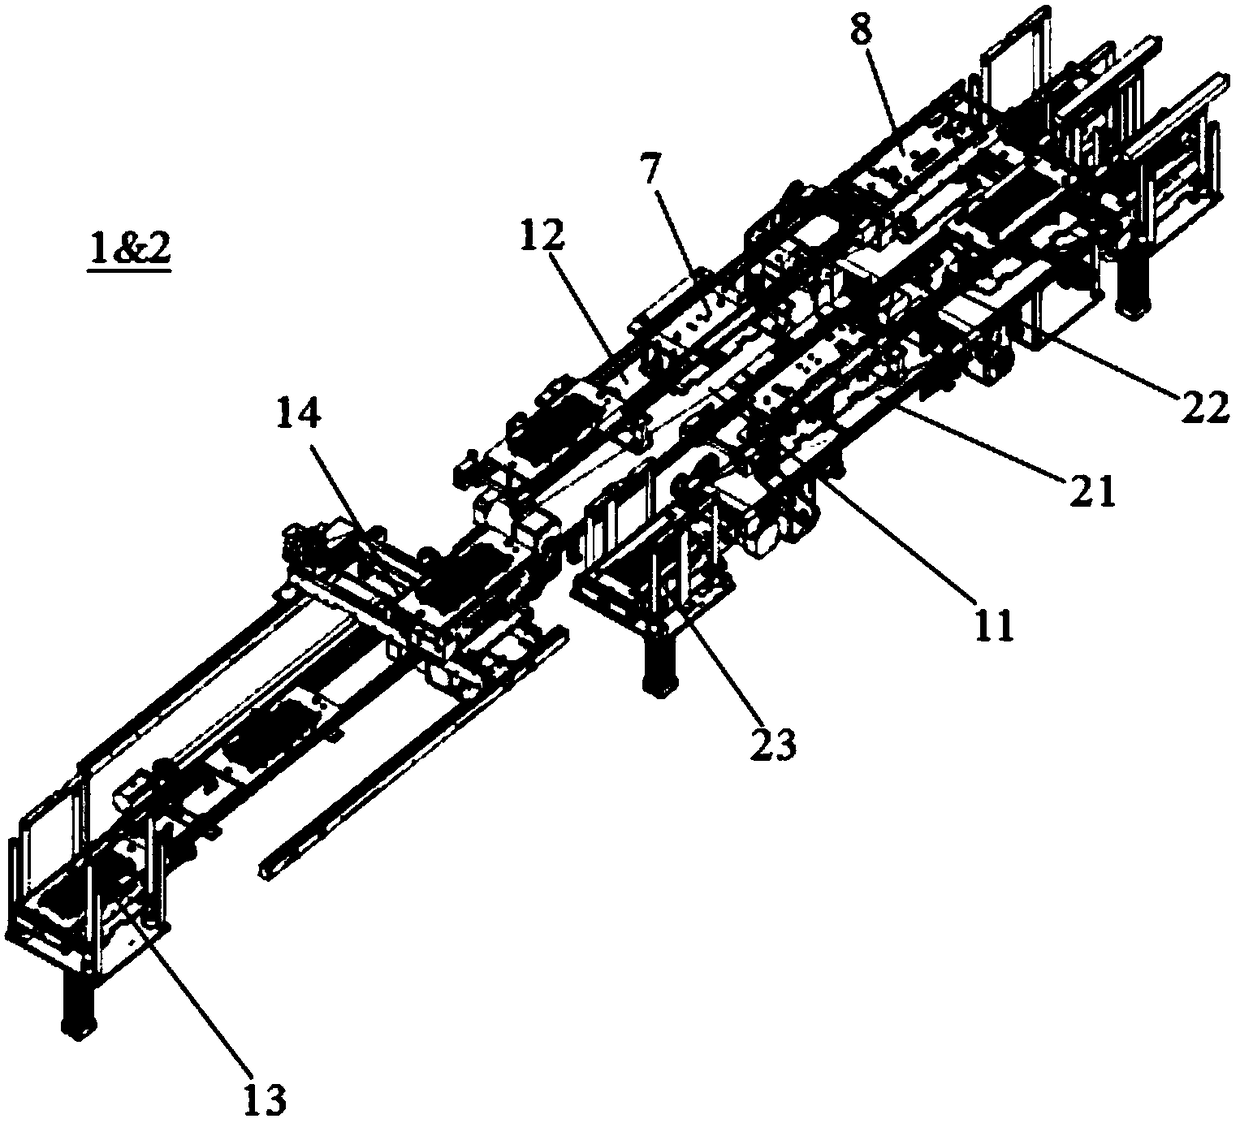 Automatic feeding and mounting mechanism for multi-specification key balance bar